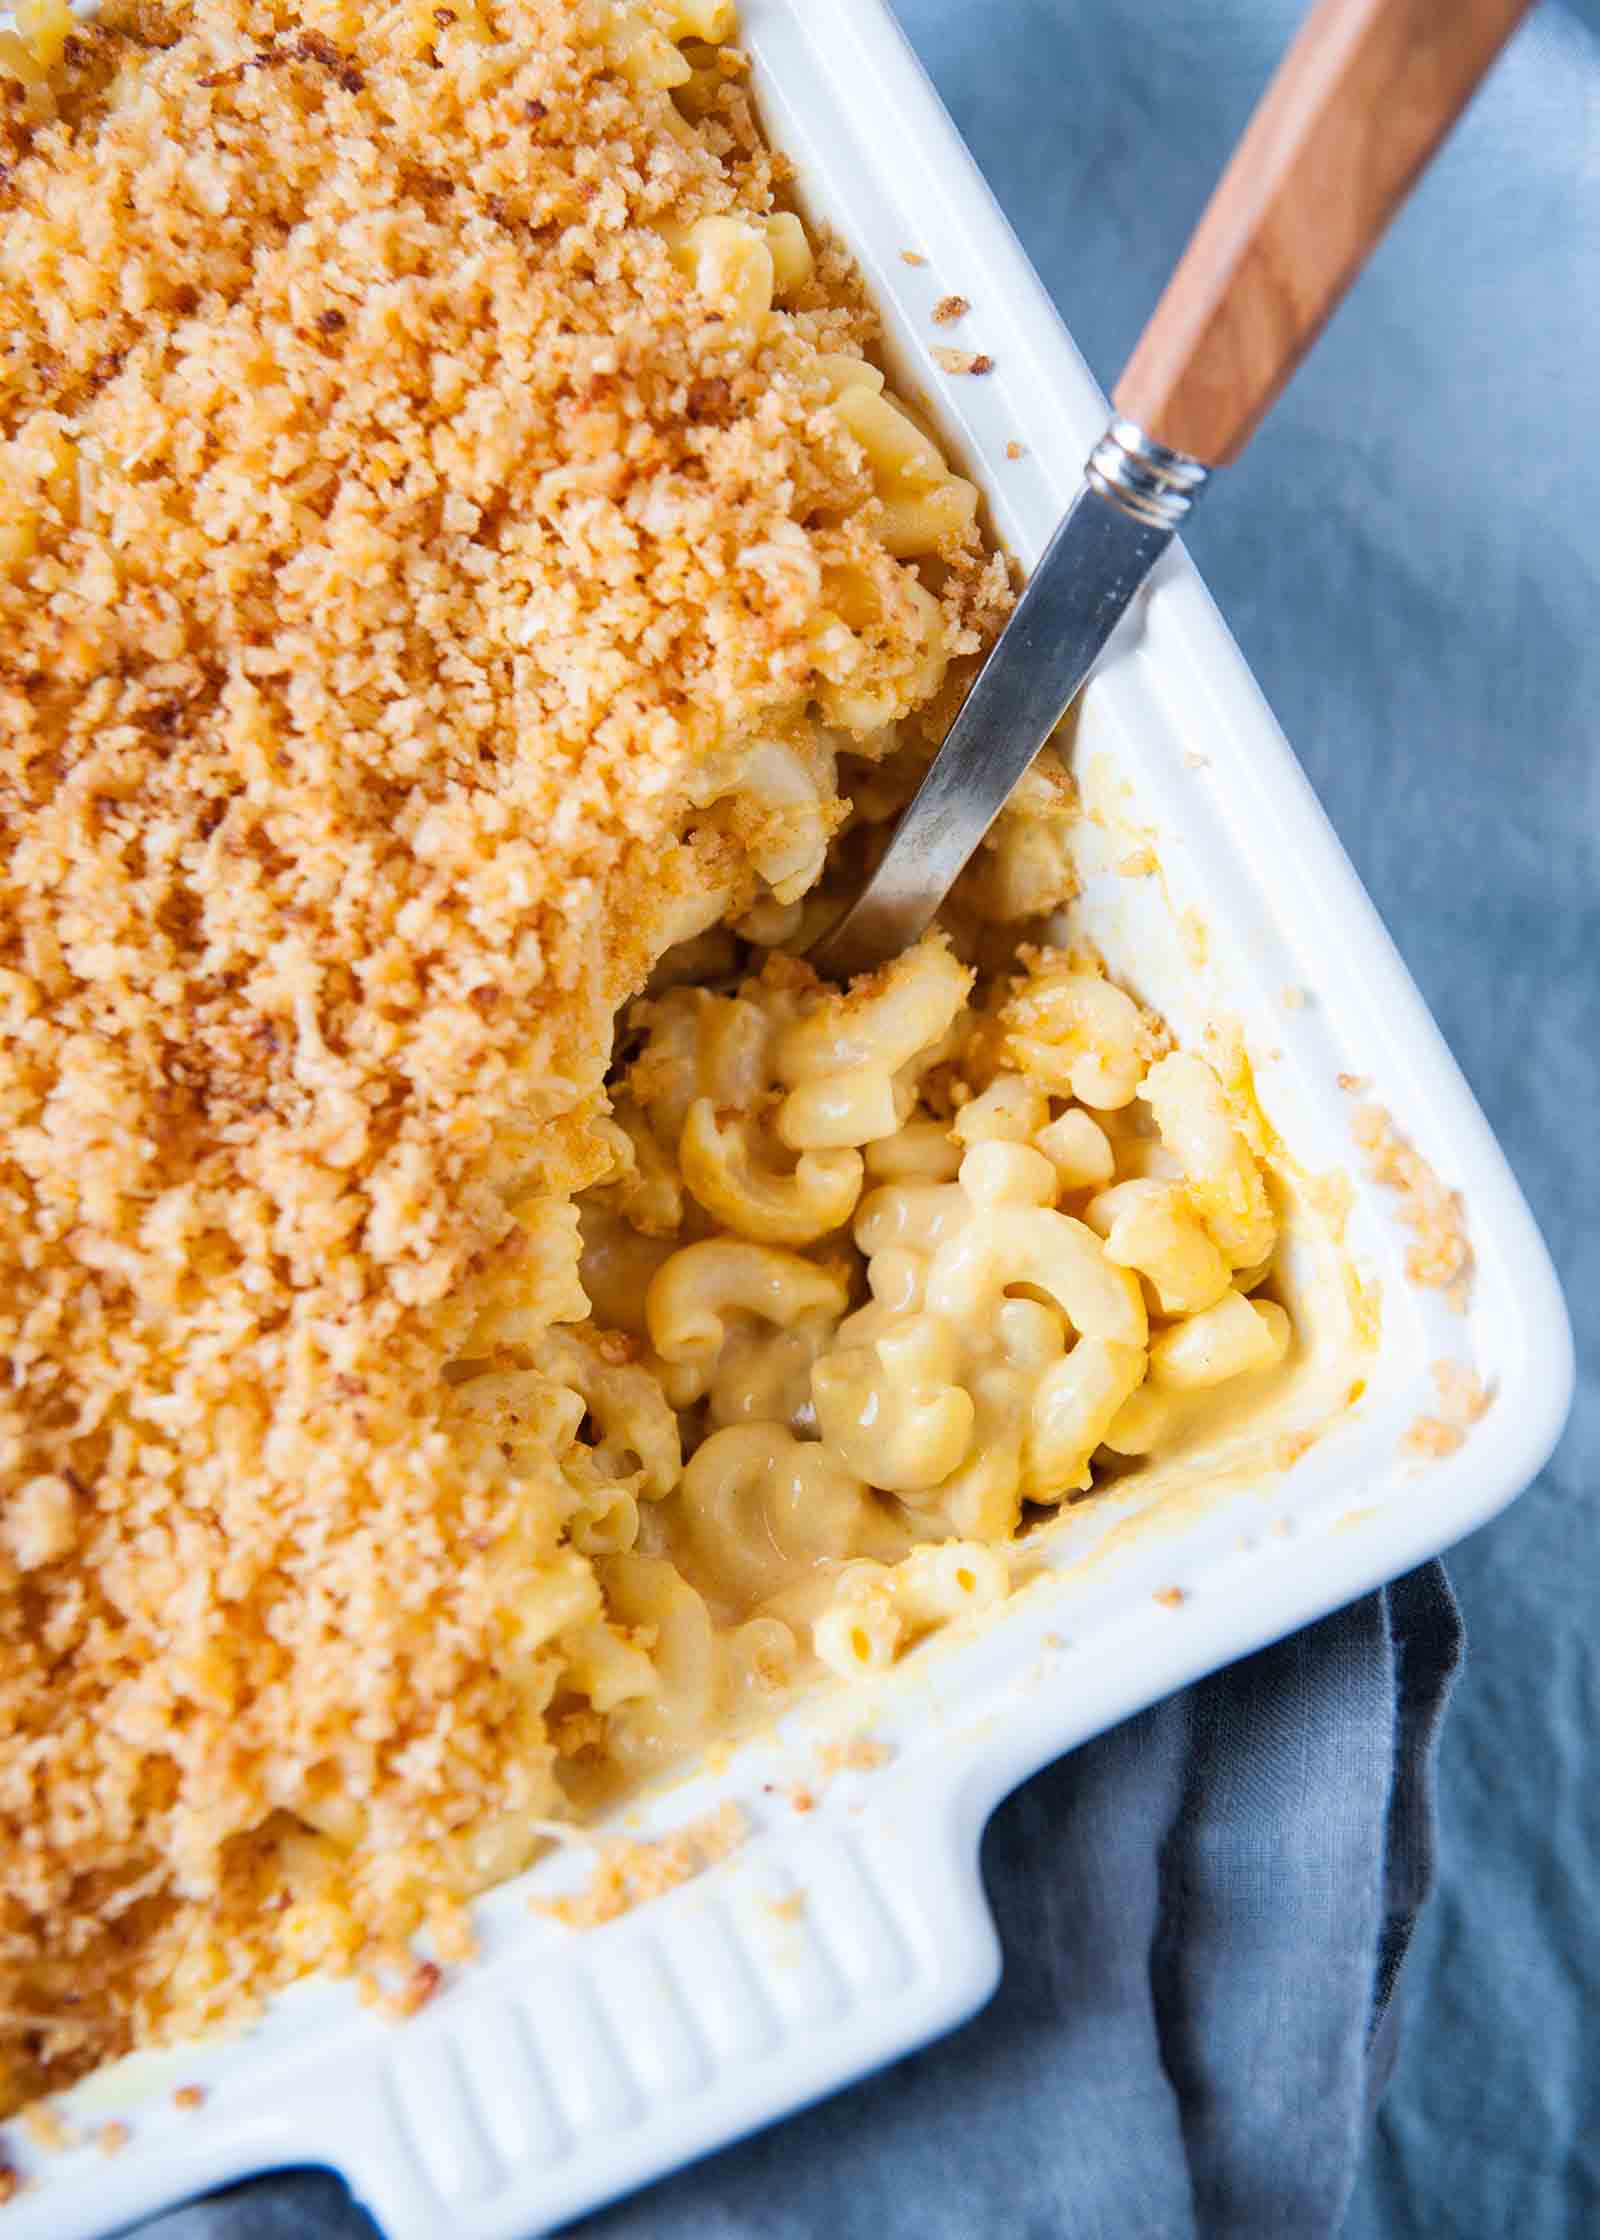 Cheese sauce recipe for mac and cheese